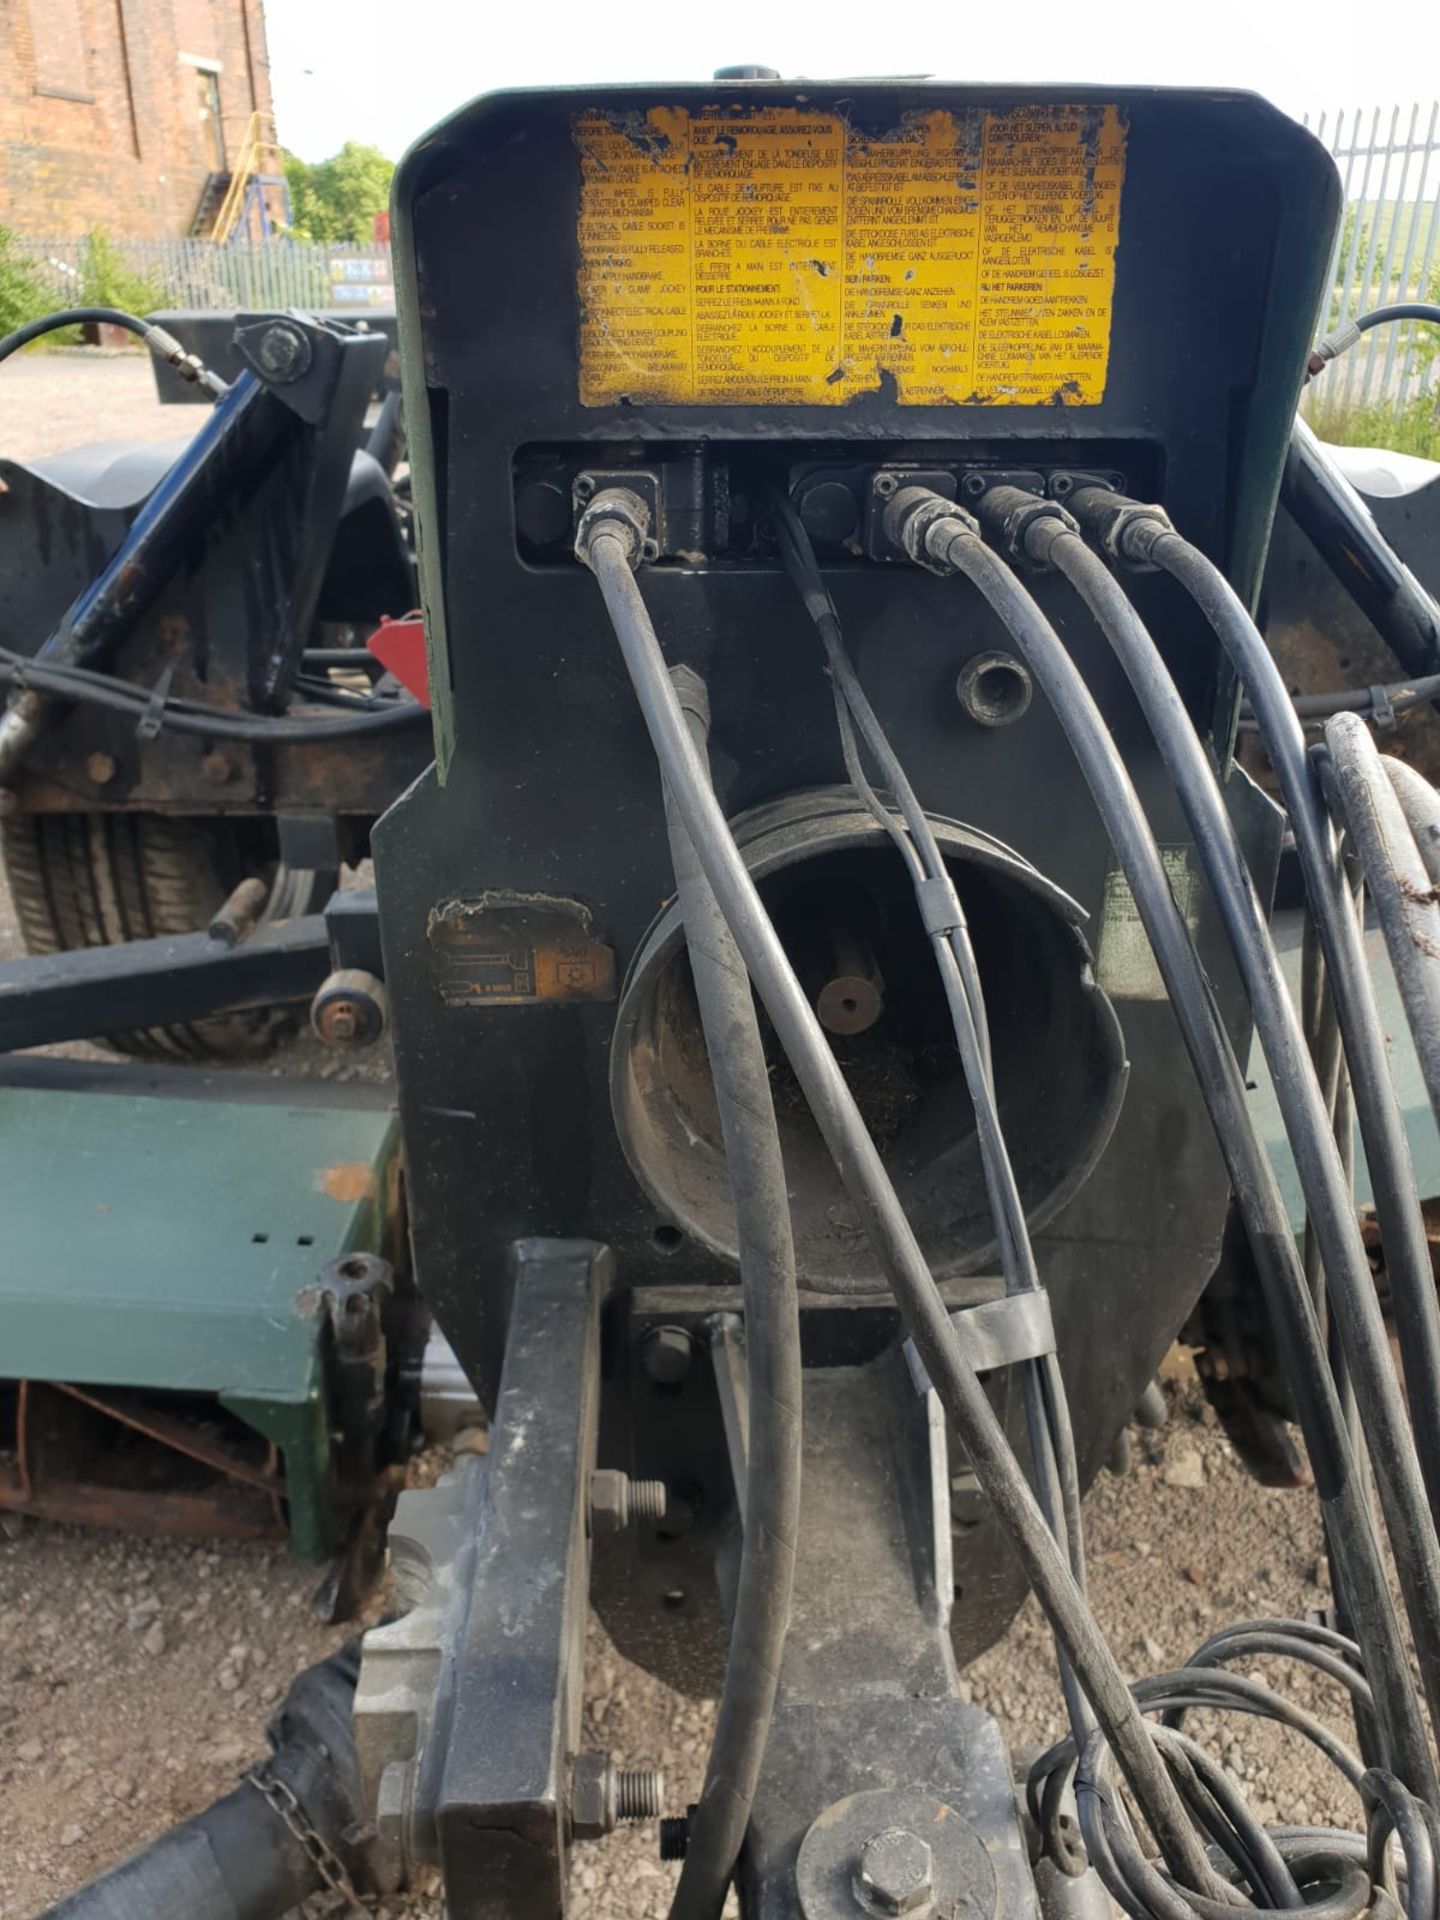 HAYTER TM SINGLE AXLE 7 GANG MOWER, YEAR 2008, REALLY GOOD CONDITION, TIRES LIKE NEW *NO VAT* - Image 11 of 16